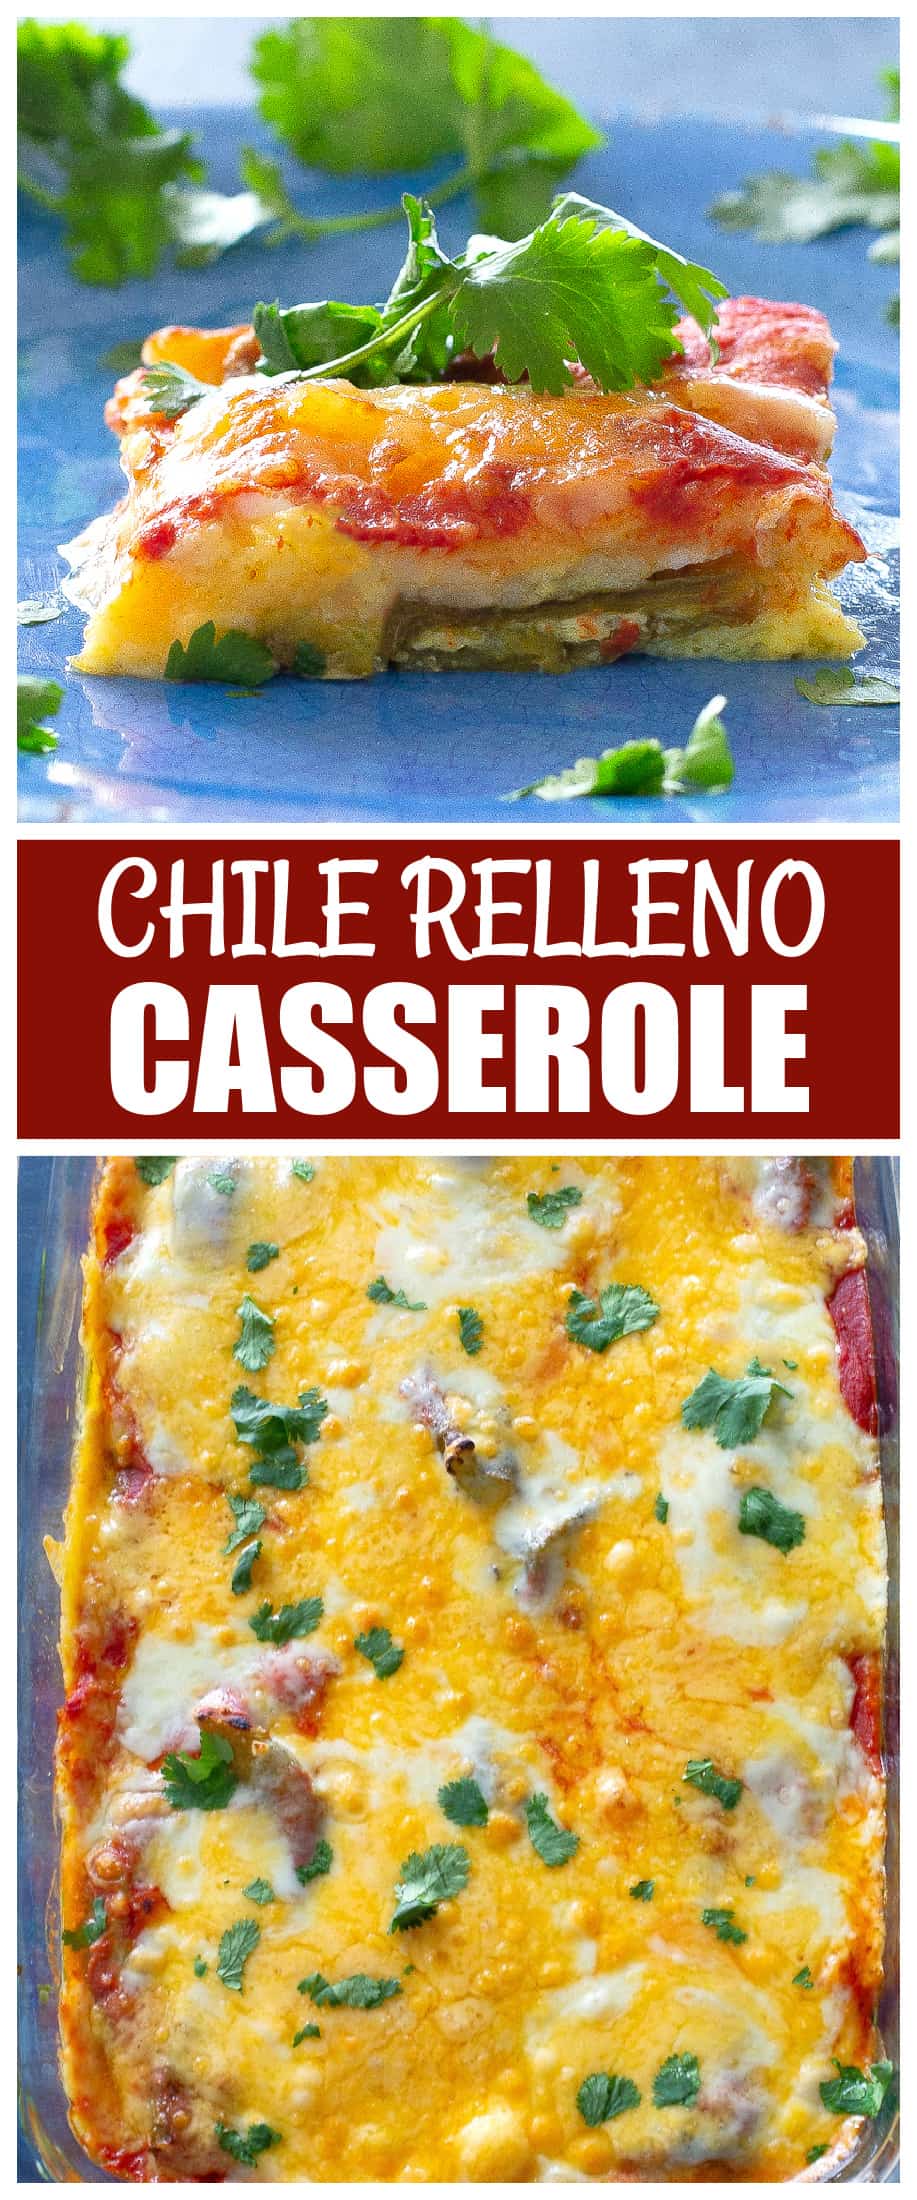 Chile Relleno Casserole has layers of chilies, eggs, cheese, and a light layer of tomato sauce. This Mexican dish can be breakfast or dinner.